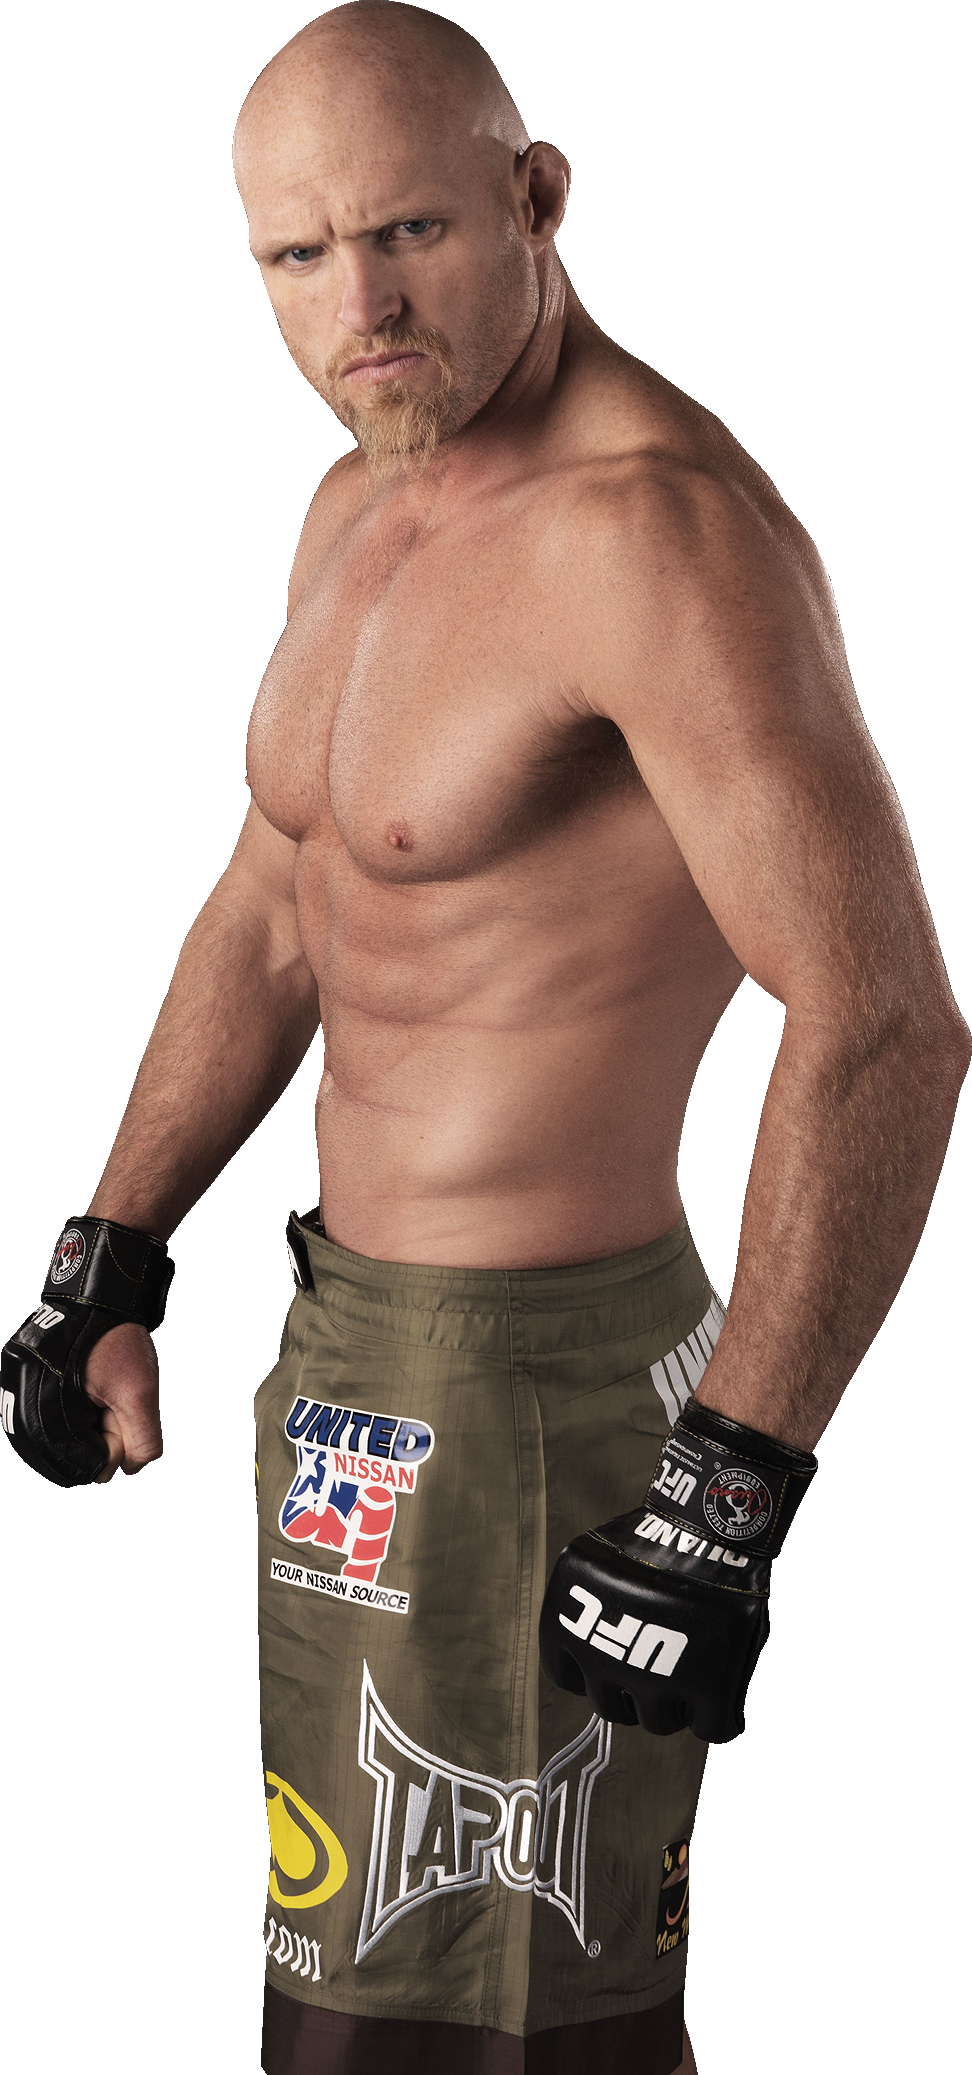 Picture of Keith Jardine